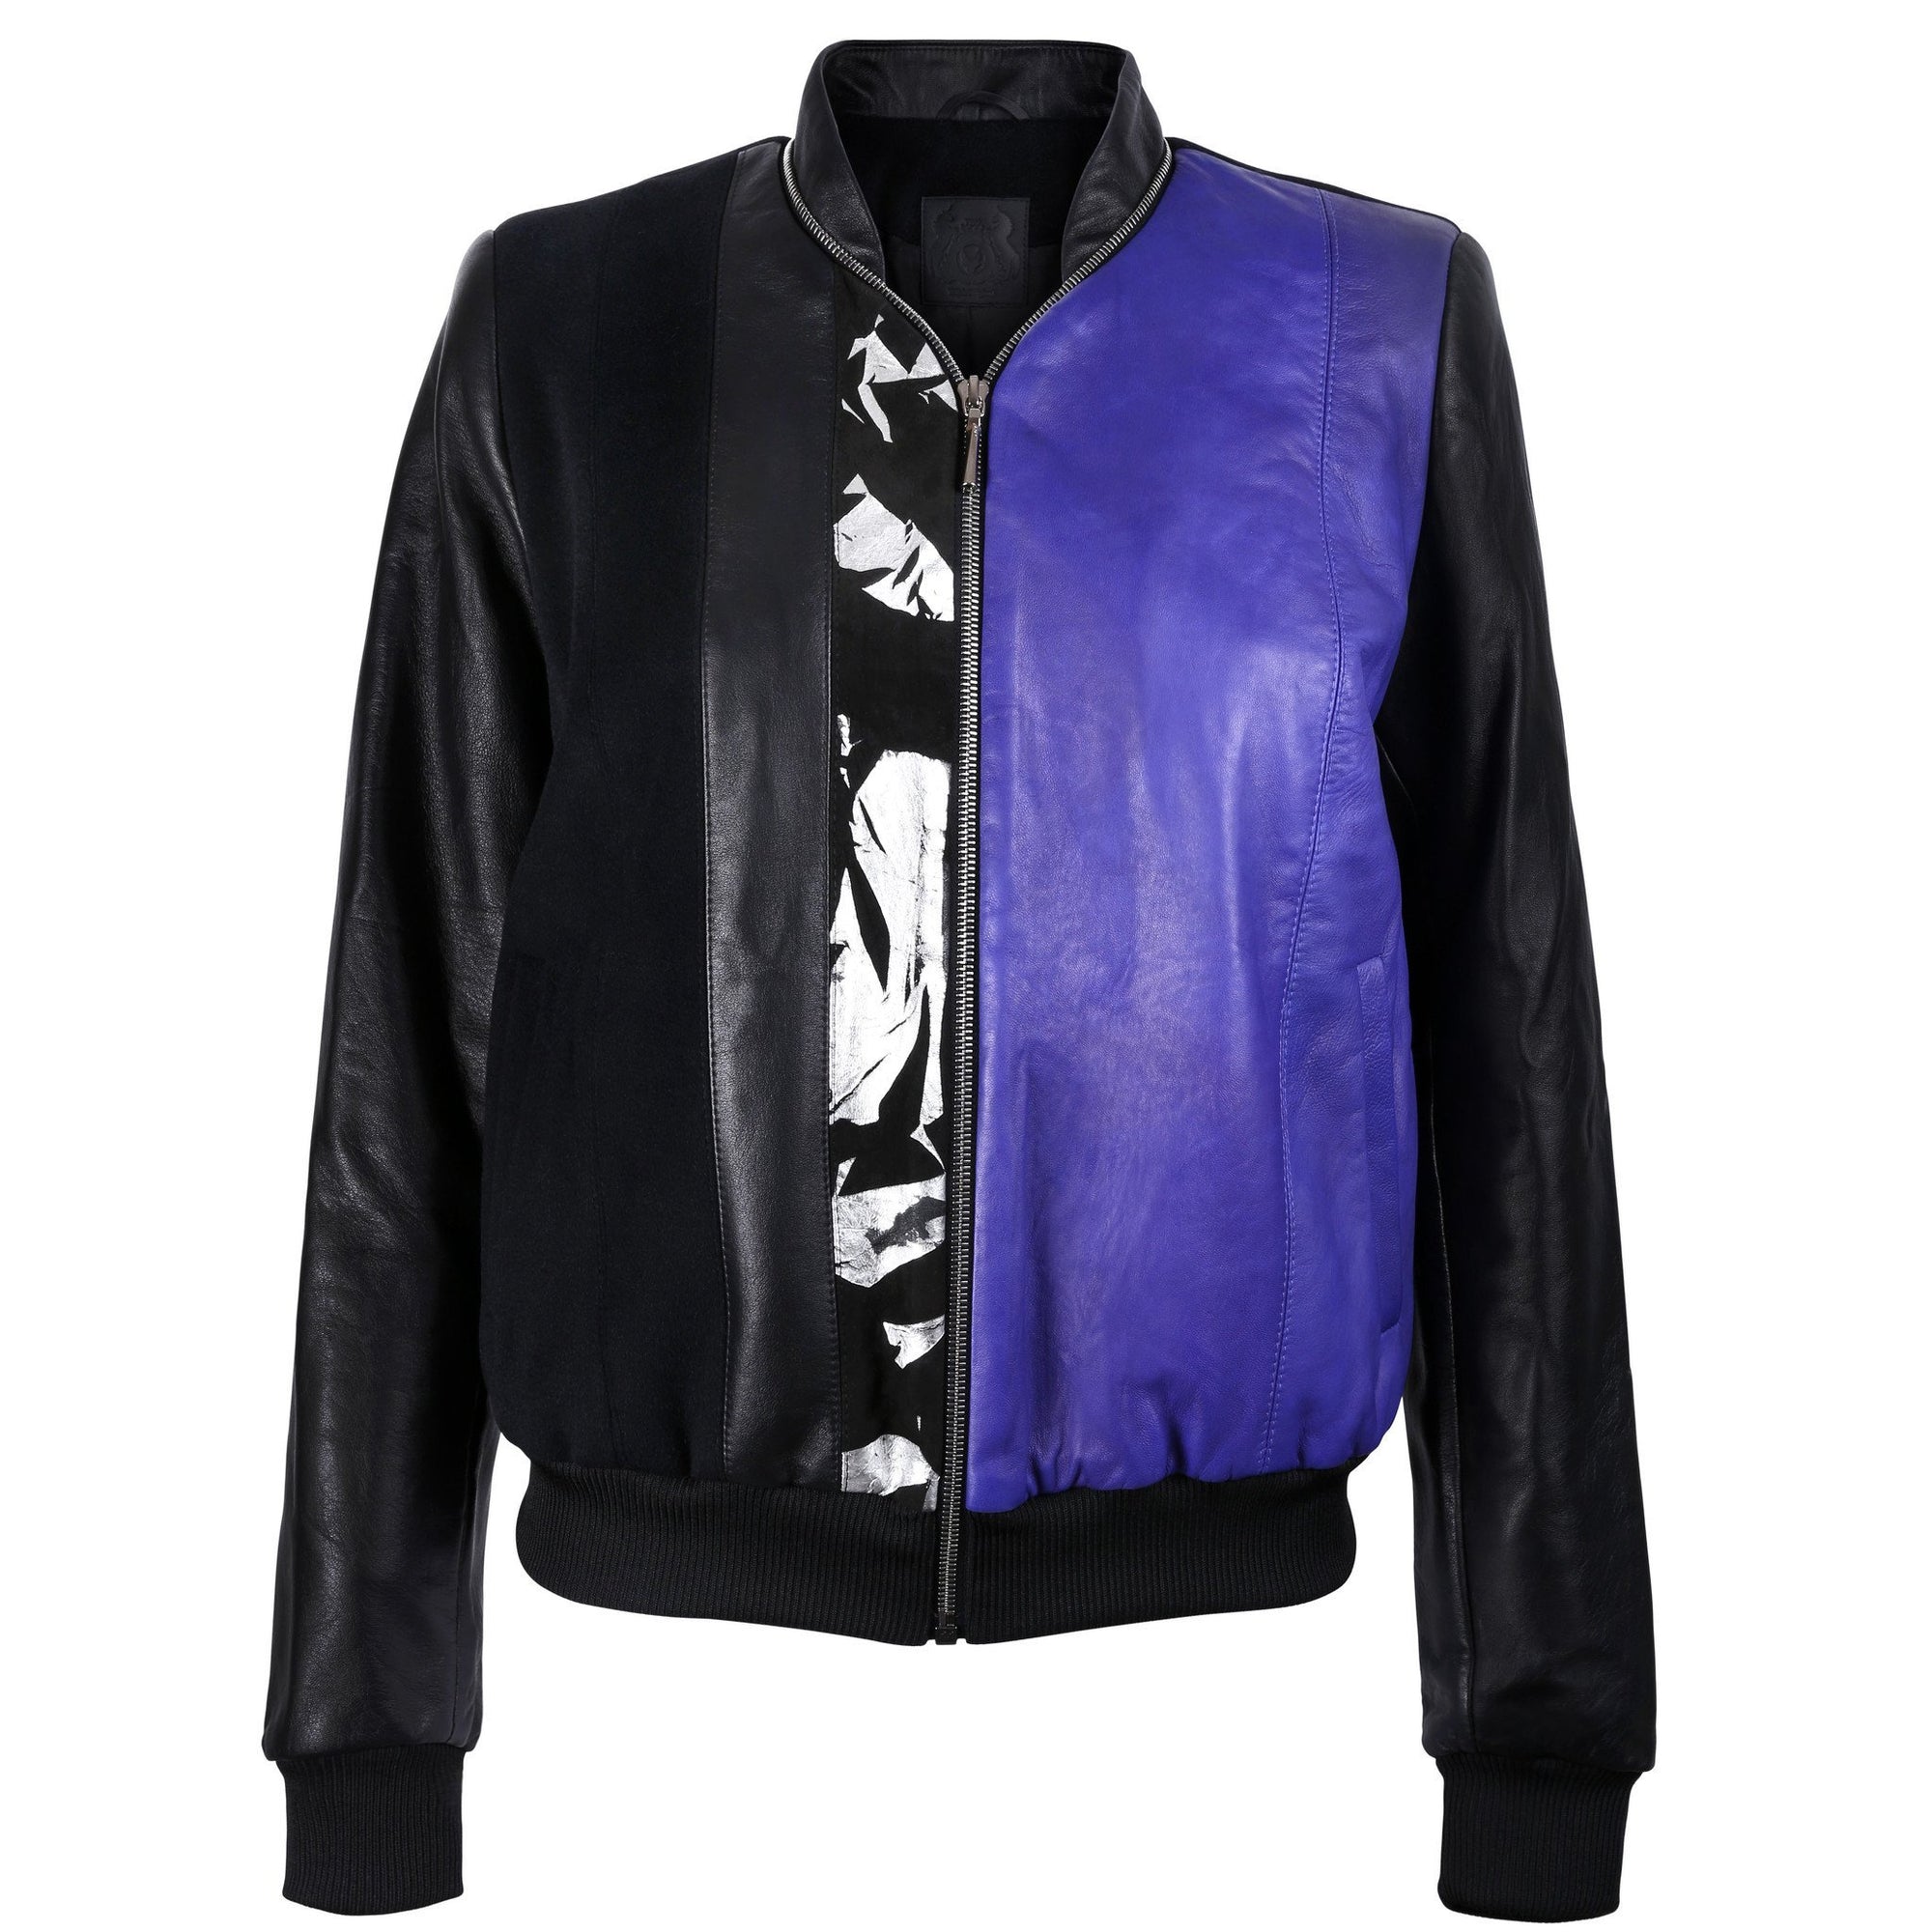 Black and Purple Leather Bomber Jacket with Silver Print Motif - VOLS & ORIGINAL